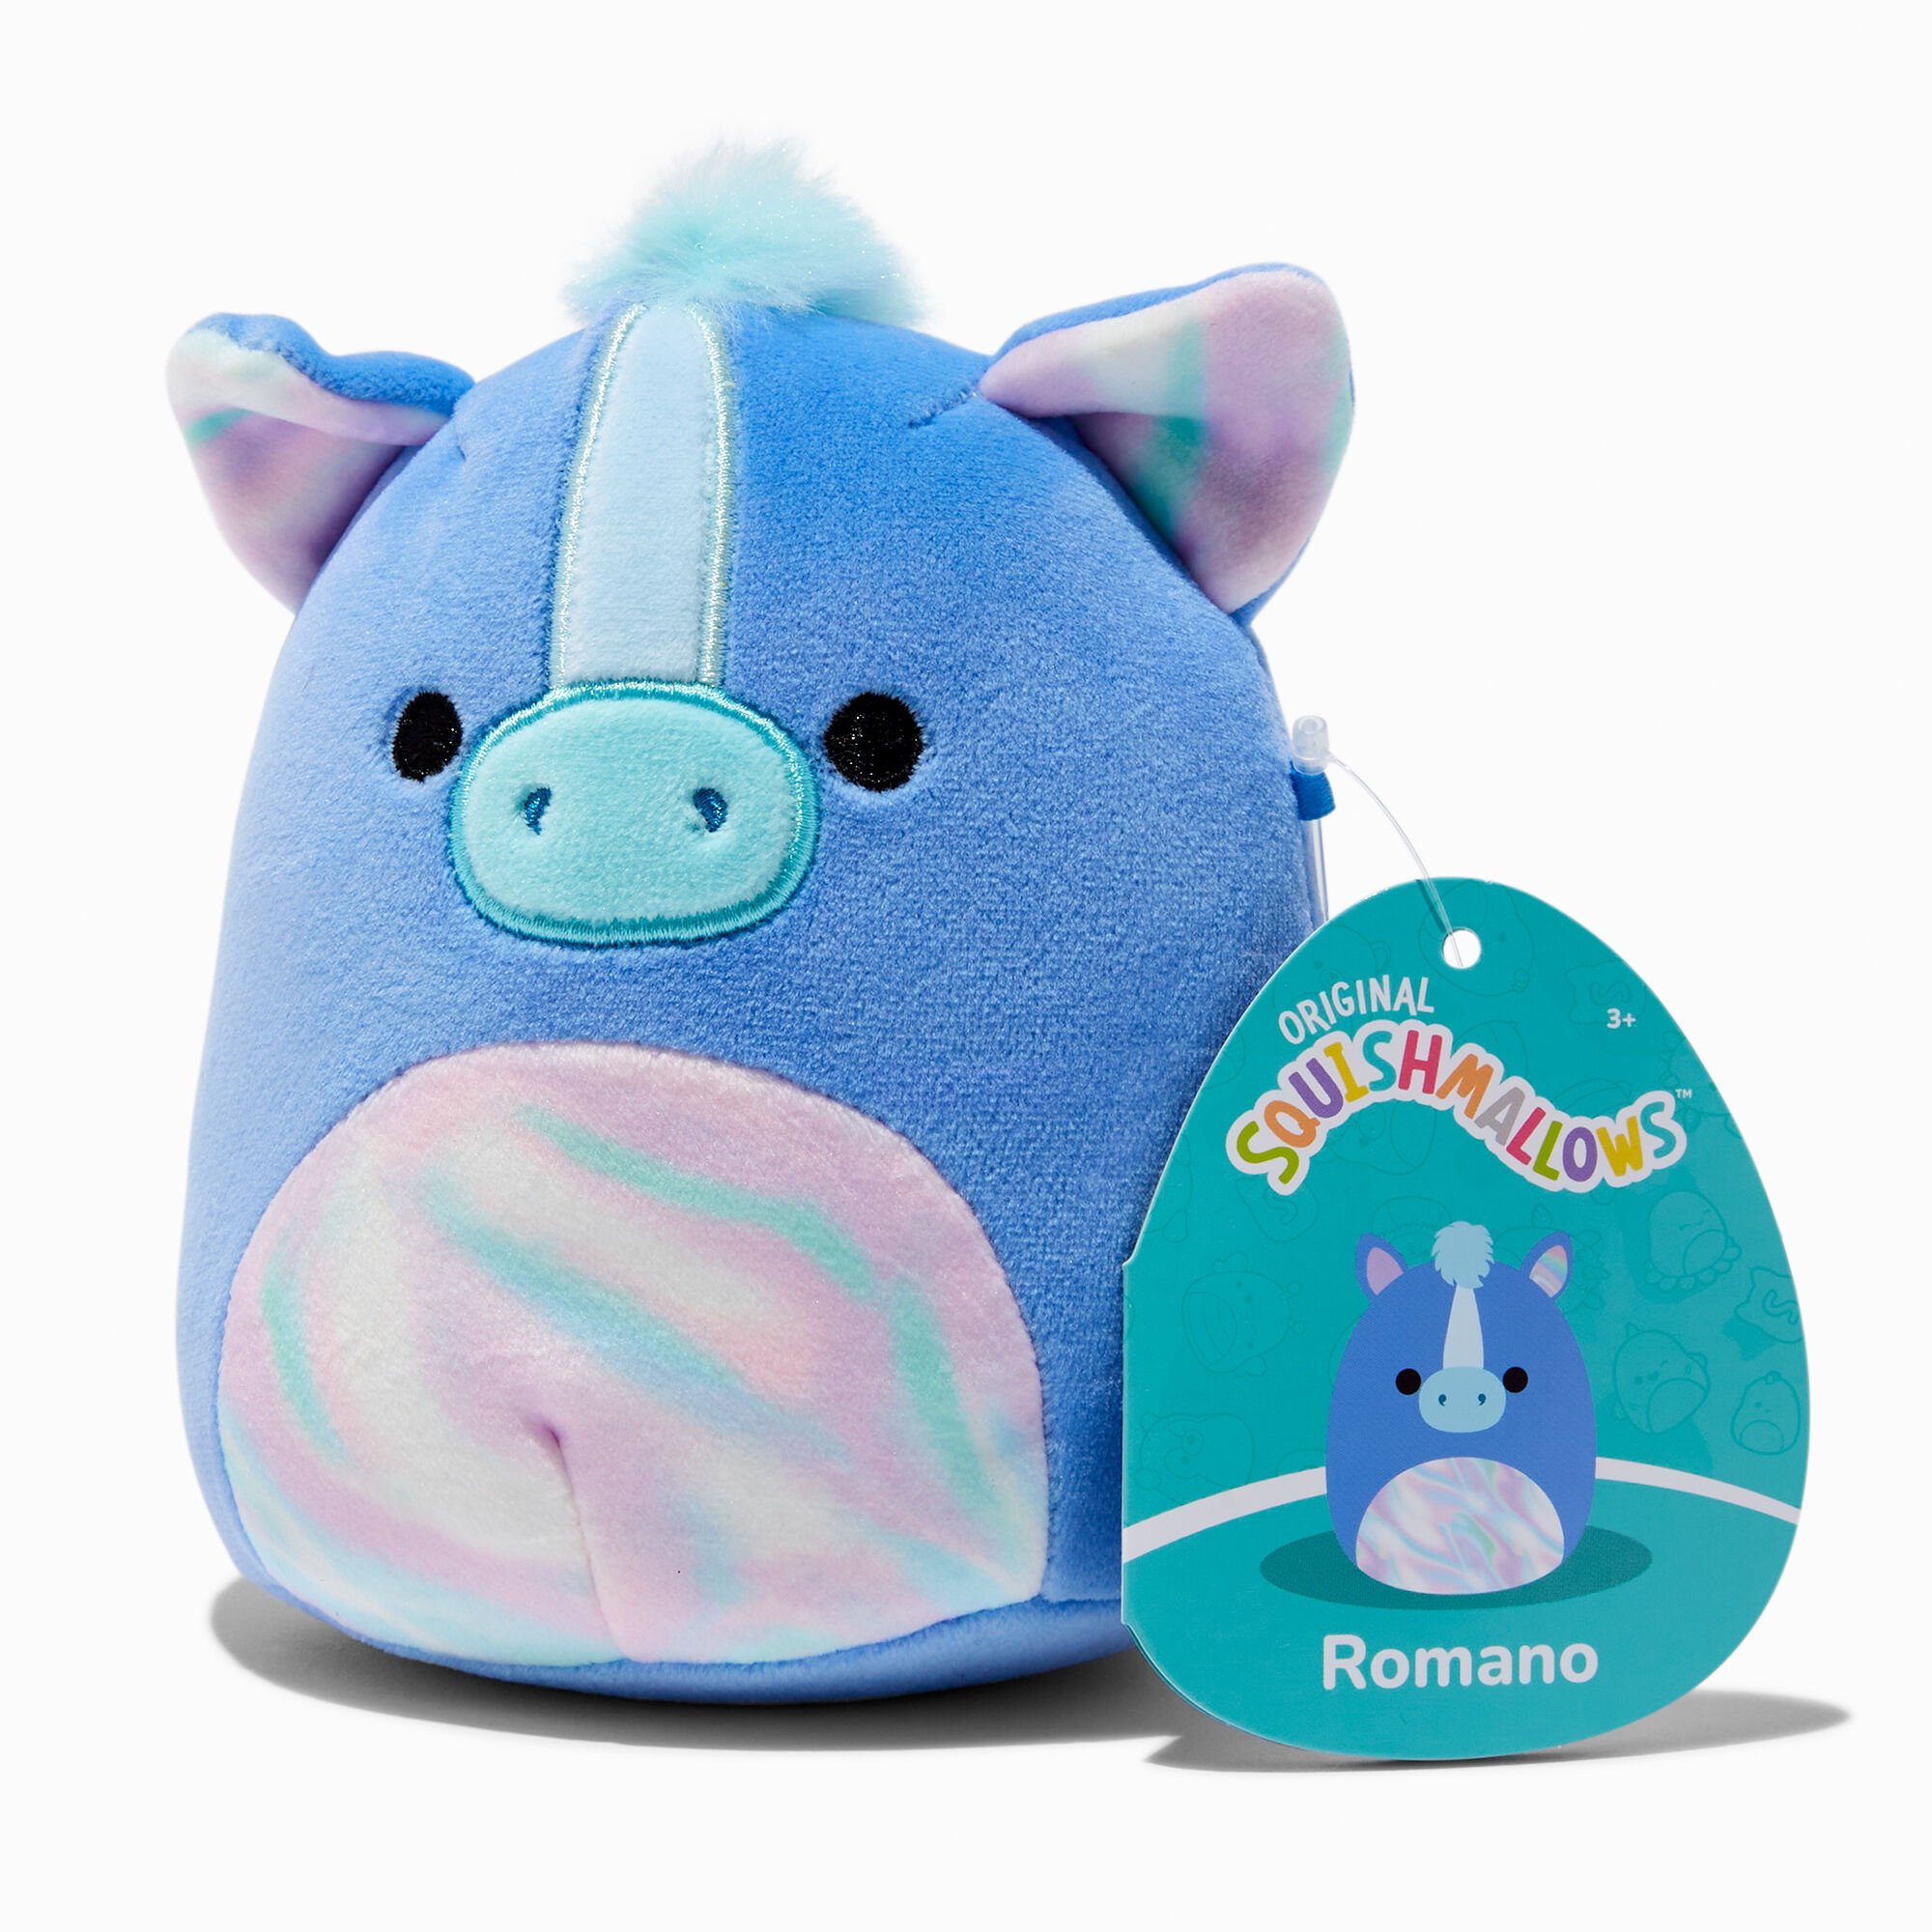 View Claires Squishmallows 5 Romano Hippo Soft Toy information